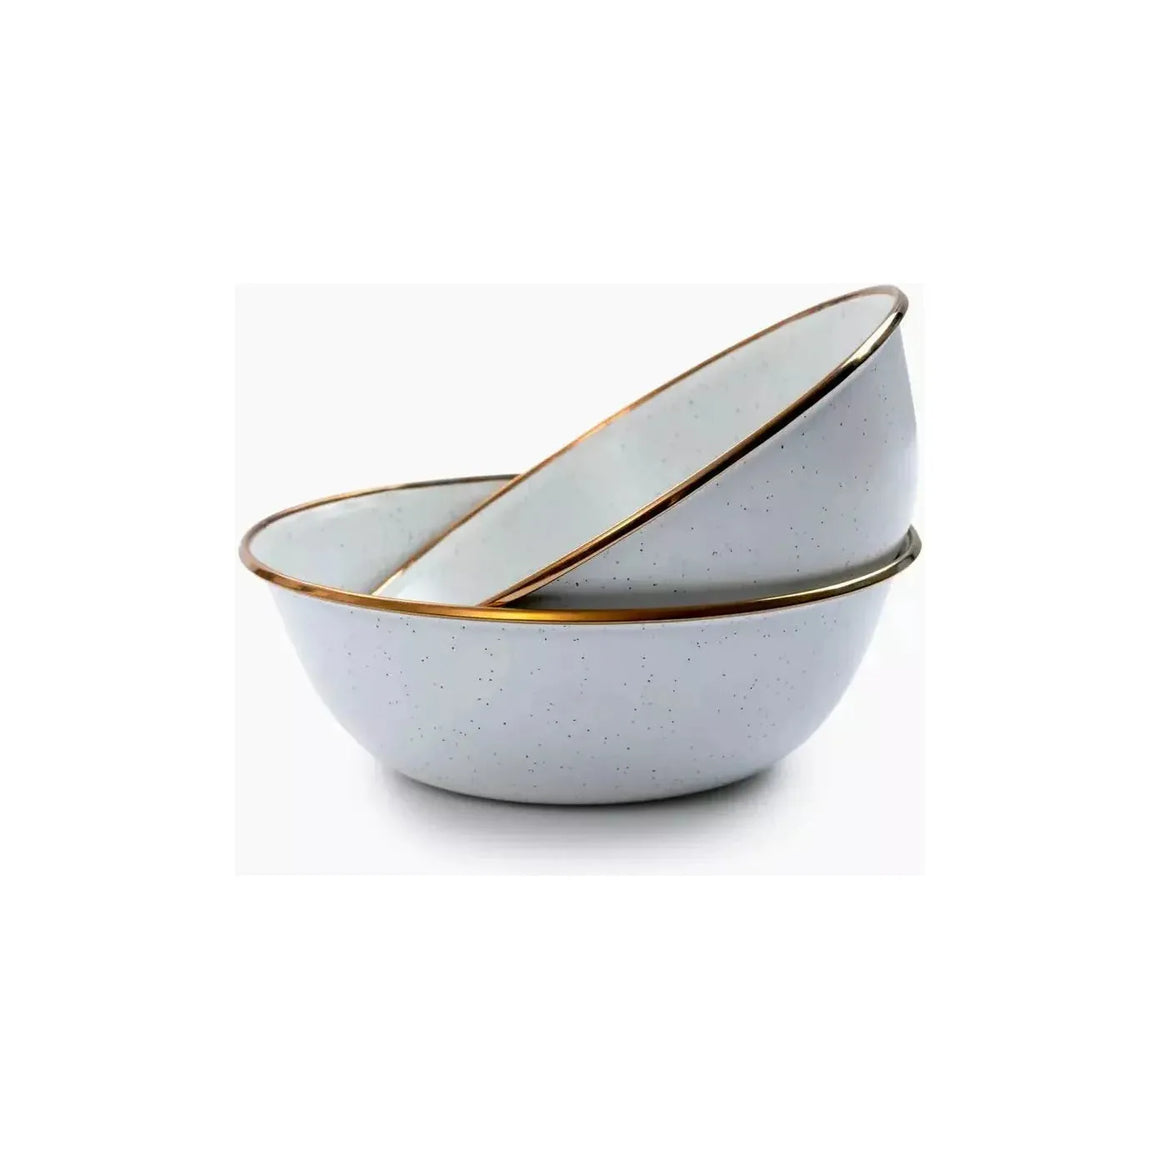 Enamelware Dining Collection - Eggshell